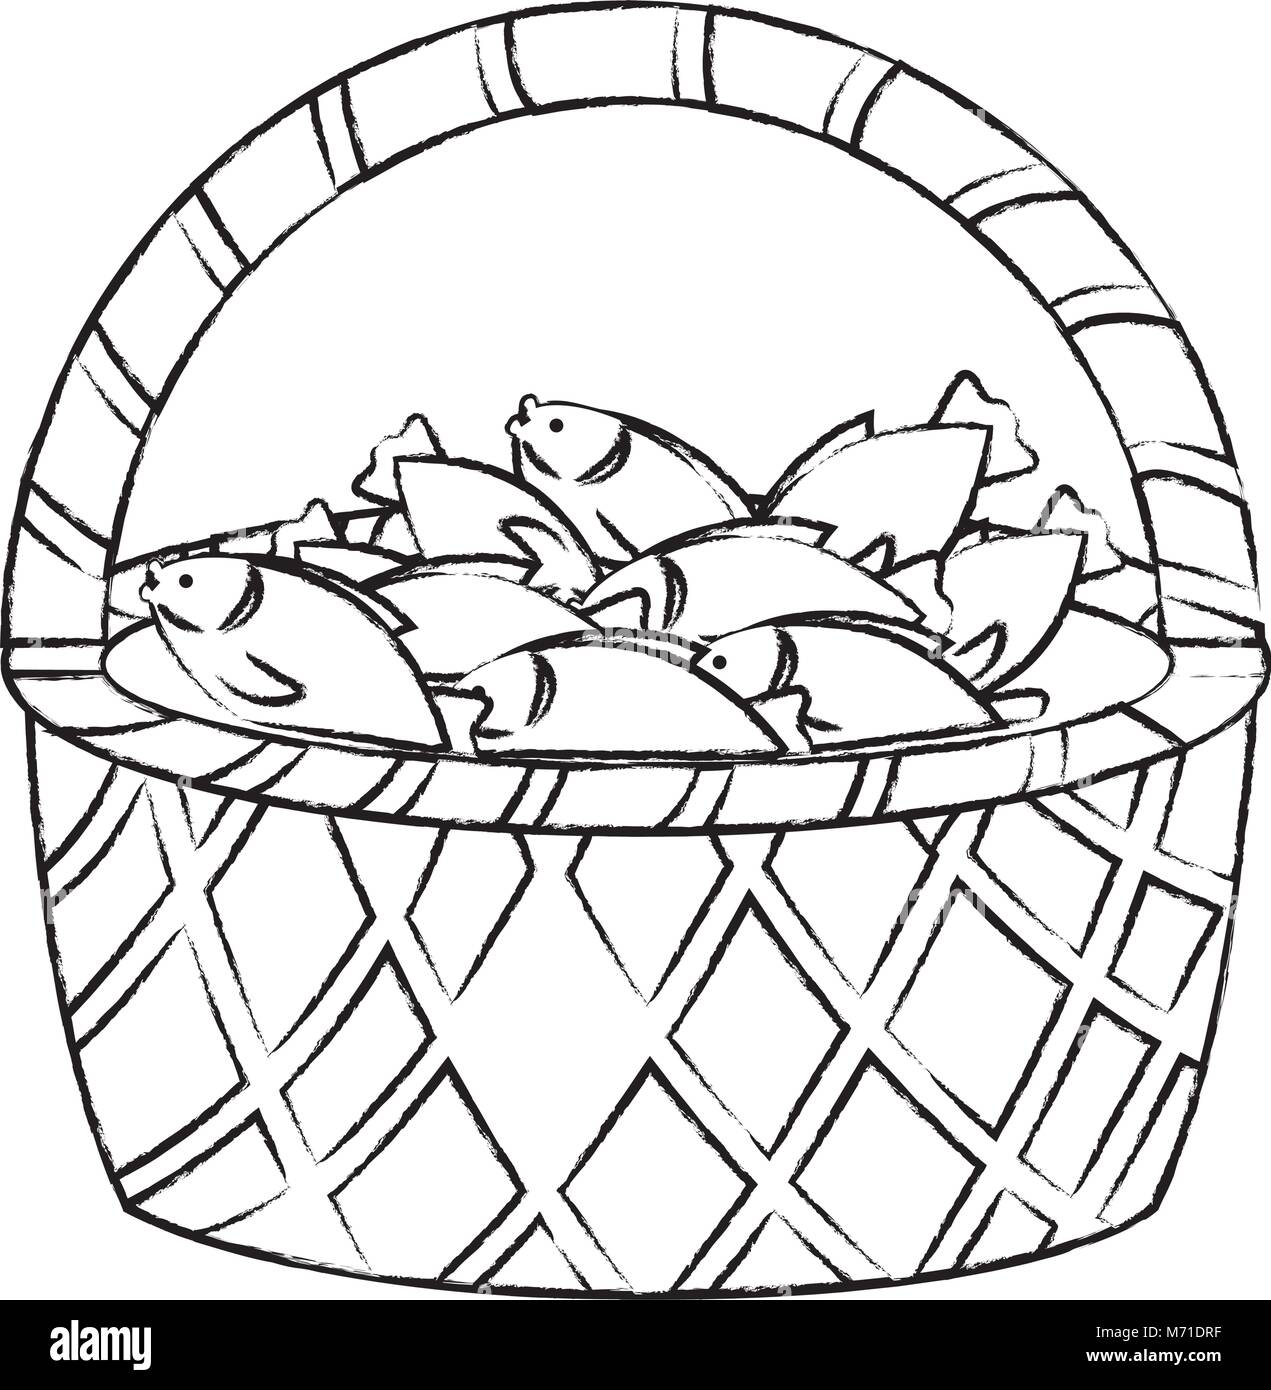 sketch of Basket with fish over white background vector